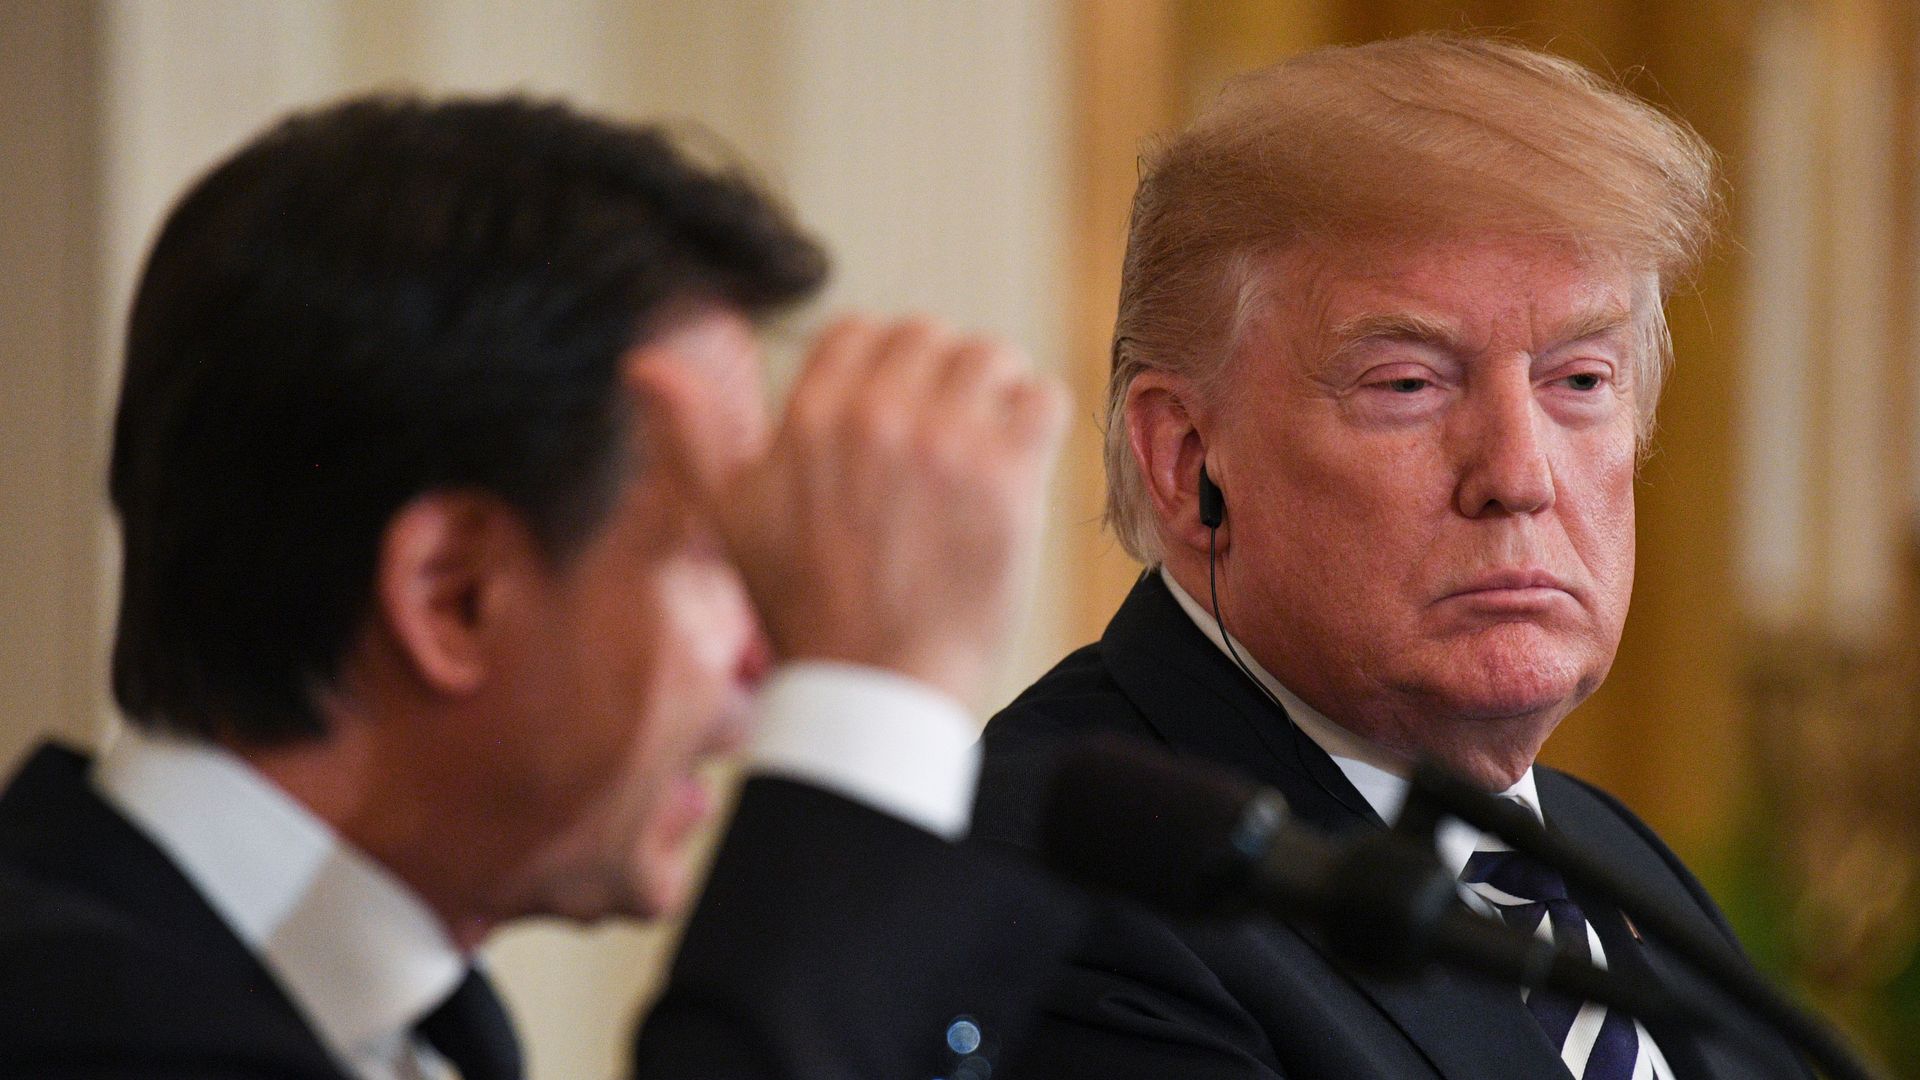 President Trump listens during a joint press conference with Italian Prime Minister Giuseppe Conte in the East Room of the White House in Washington, DC, July 30, 2018. 